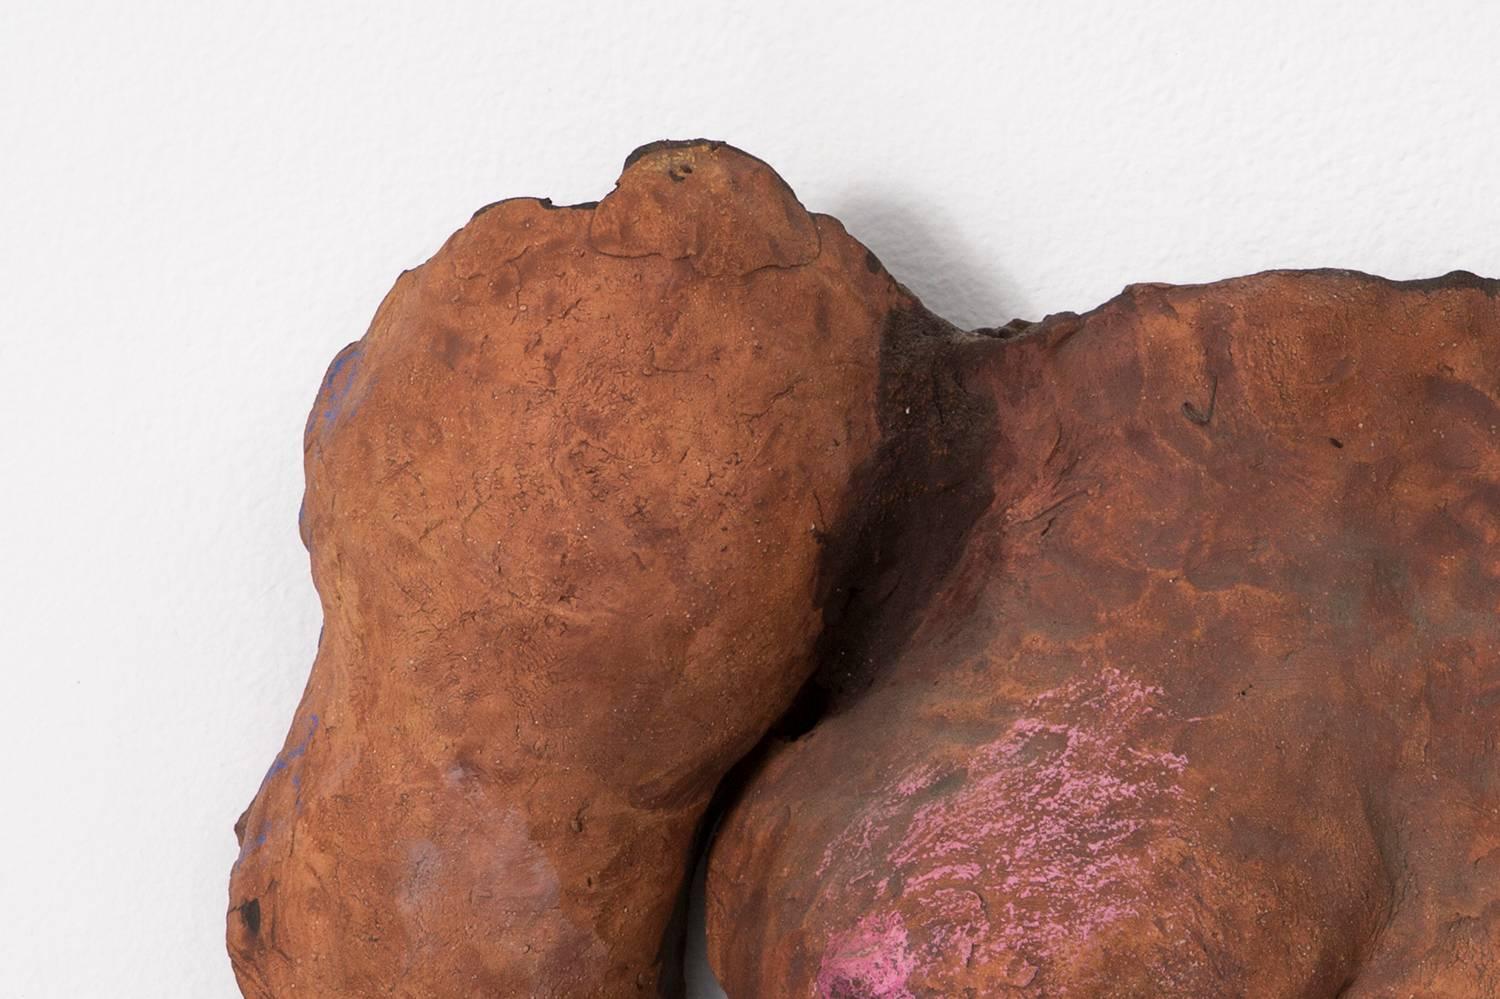 Young Breasts - Sculpture by Ruth Aizuss Migdal